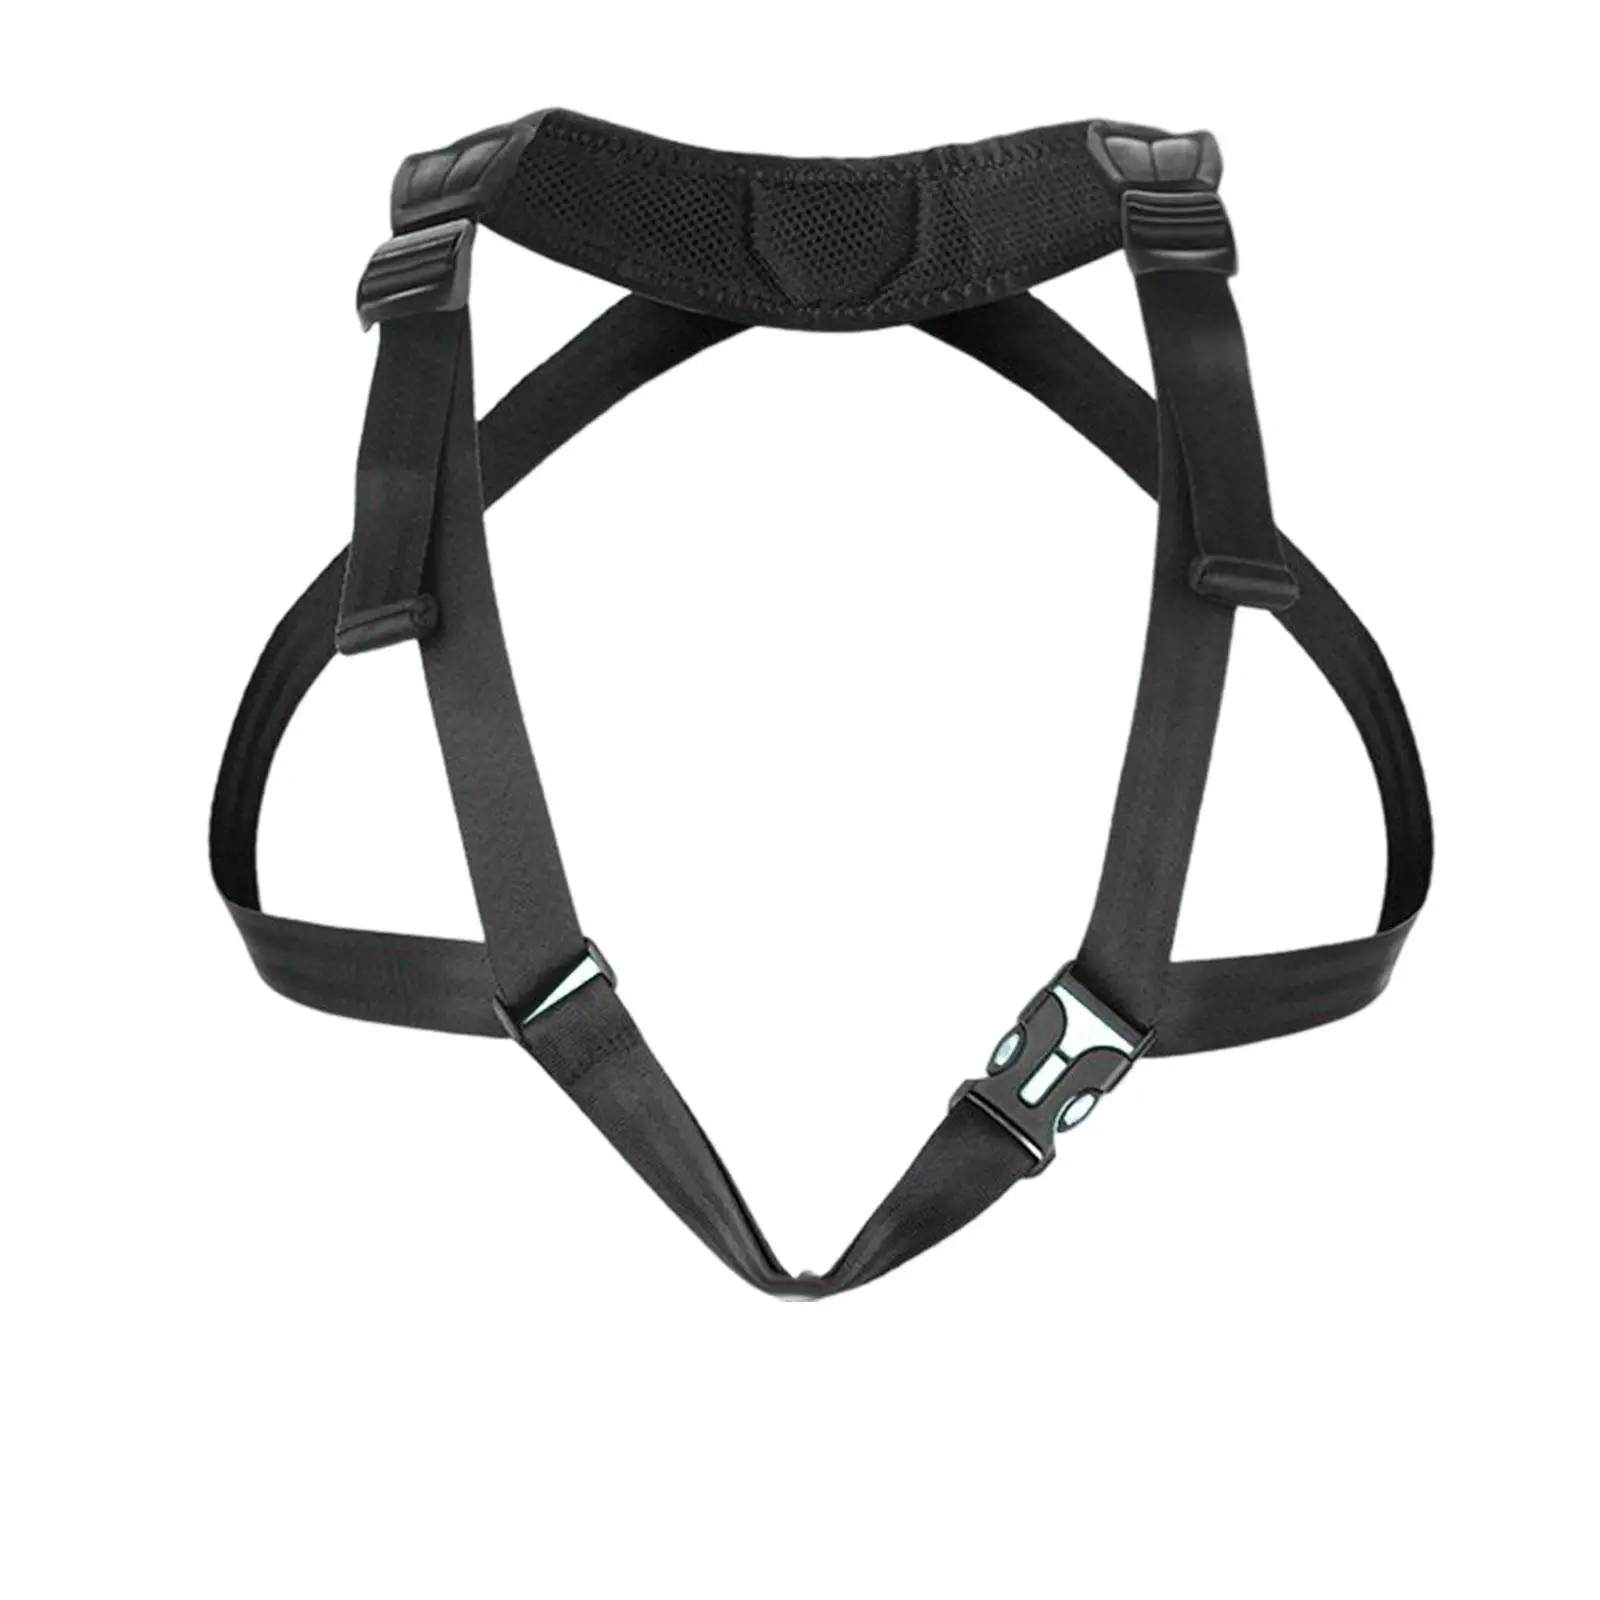 Professional  Neck Strap Metal Hook Breathable  Shoulder Harness Music Instrument Accessory for Tenor Soprano